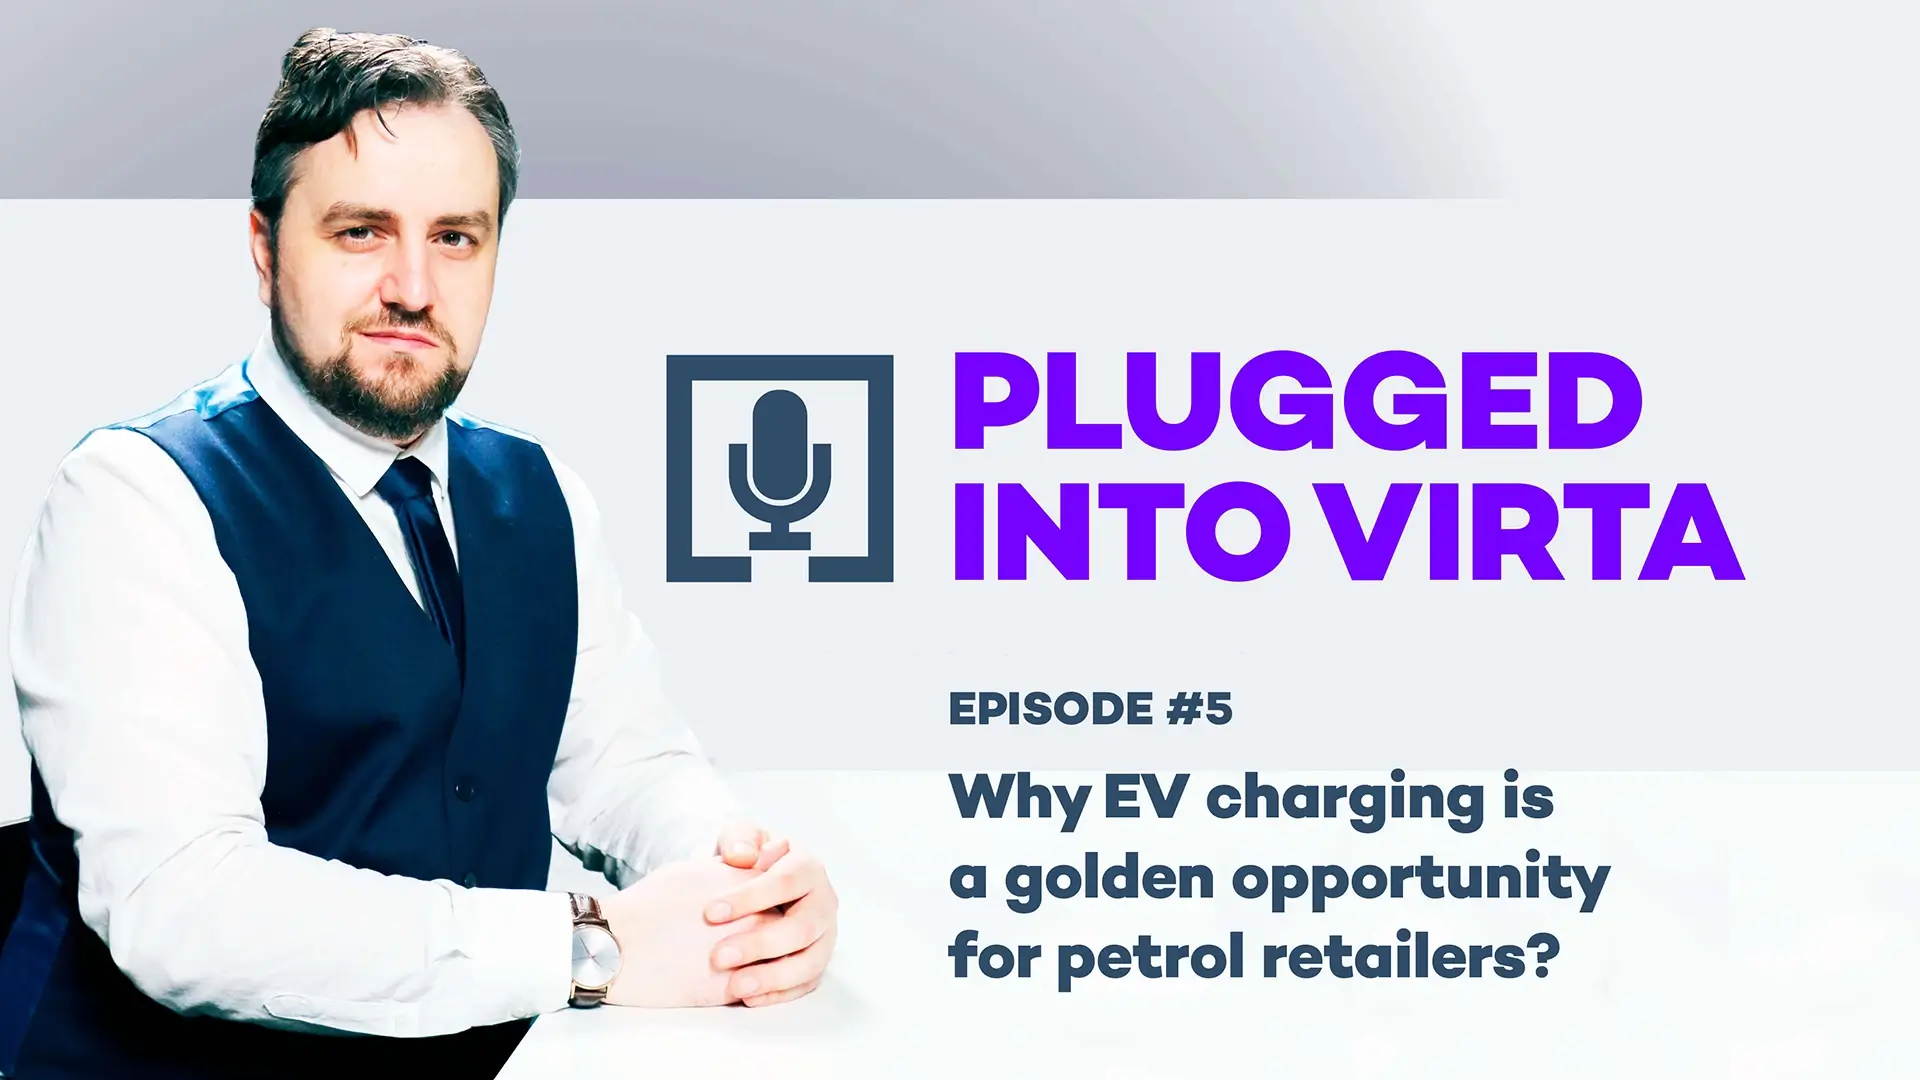 Plugged into Virta Episode 5 Why EV charging is a golden opportunity for petrol retailers